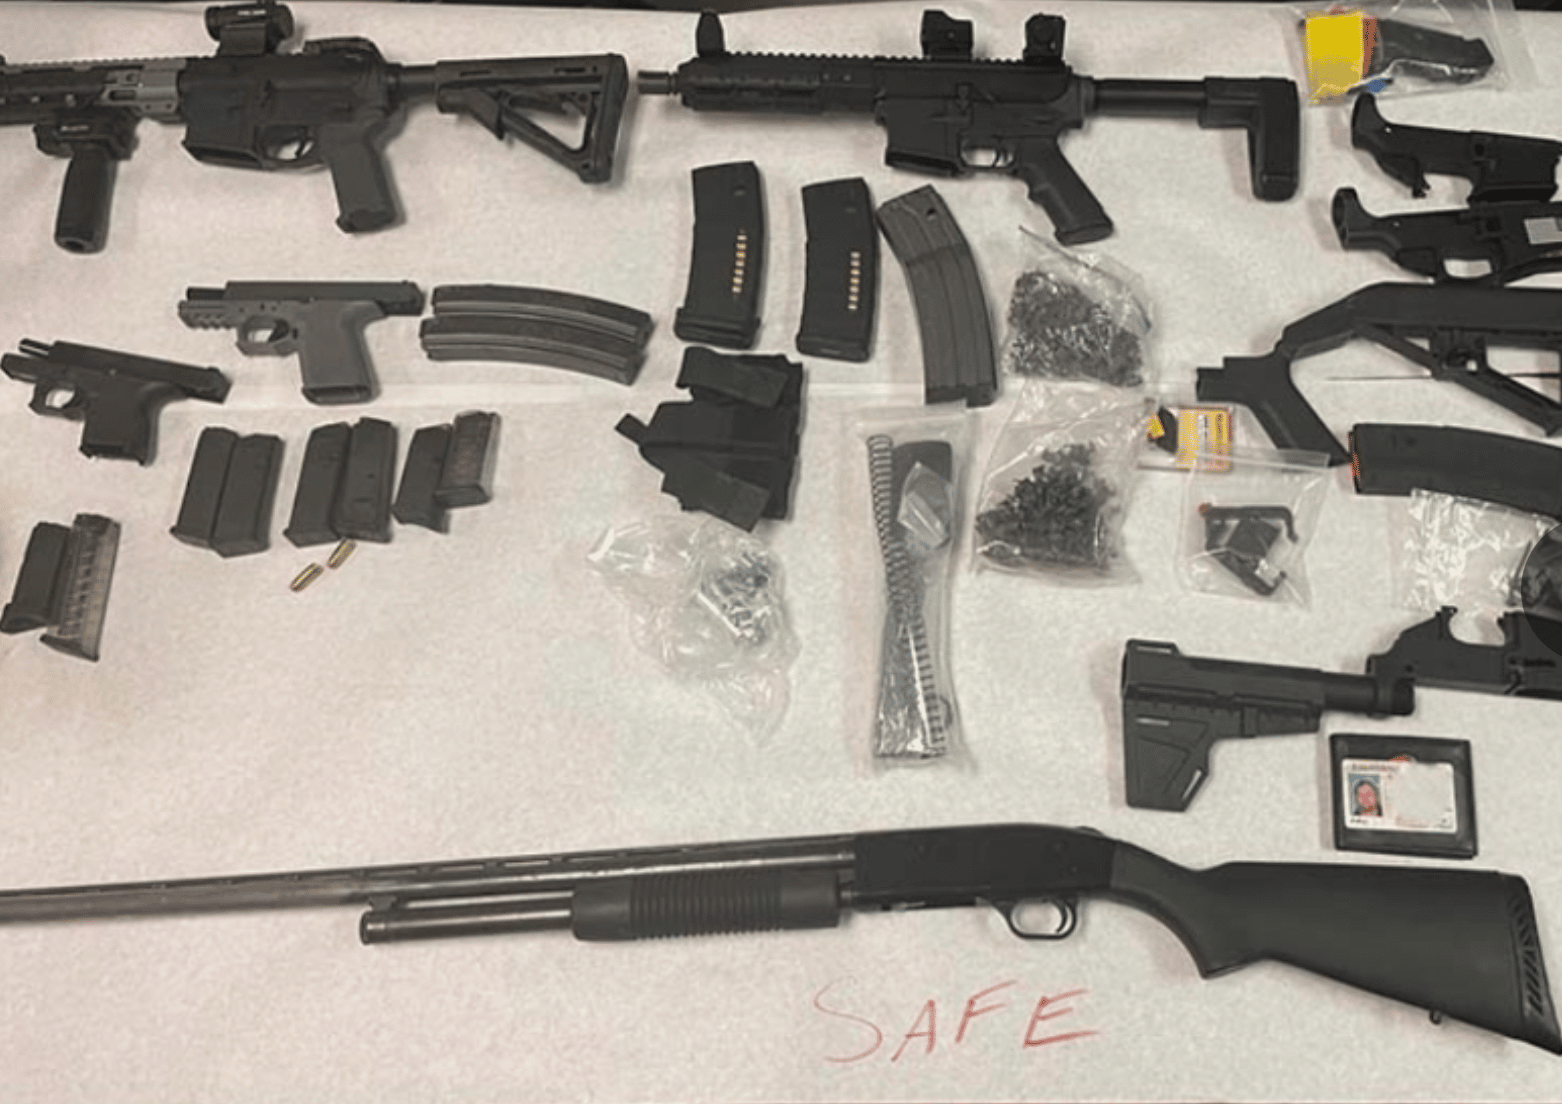 Weapons seized at the Apple Valley home of Steven Allen Schultz who pleaded guilty to threatening Eastvale co-workers in July. Credit Riverside County Sheriff